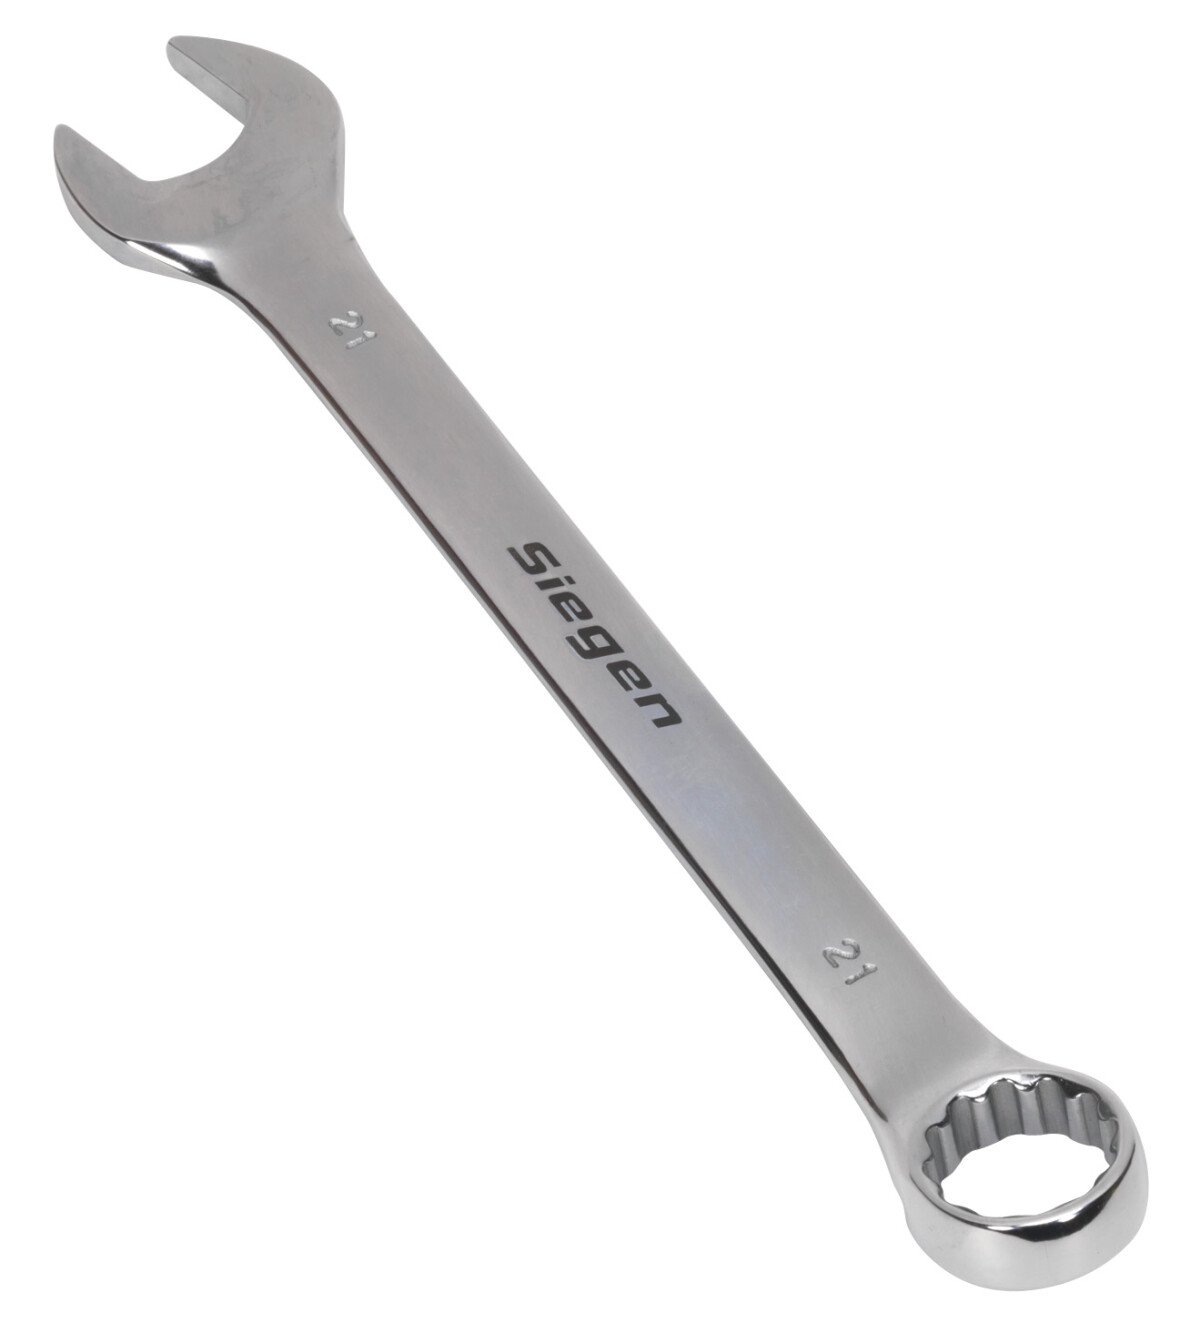 Sealey S01021 Combination Spanner 21mm